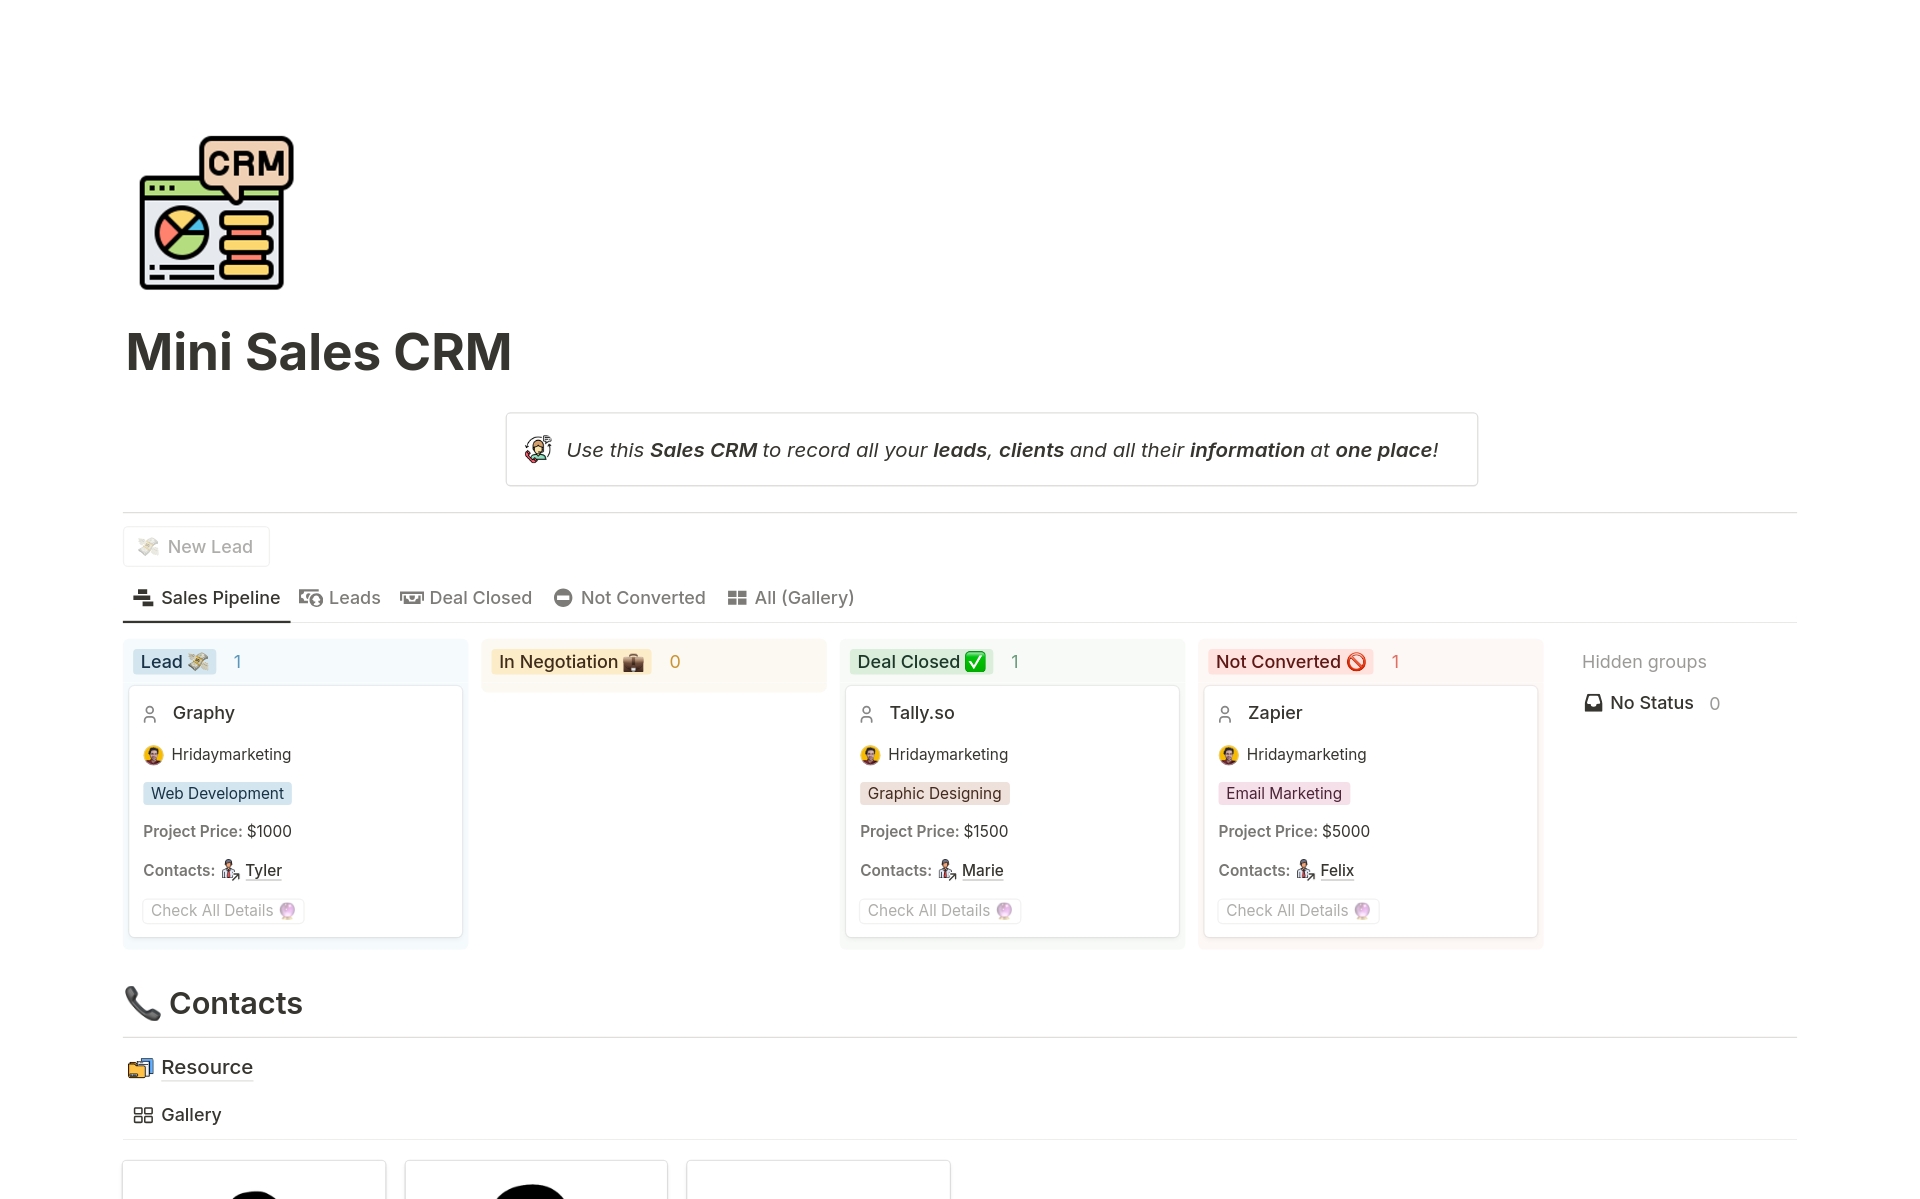 Close Deals Faster & Get Organized!

Introducing the Business Sales CRM: Organize your leads, track deals, and close more sales - all within the powerful (and familiar) interface of Notion
